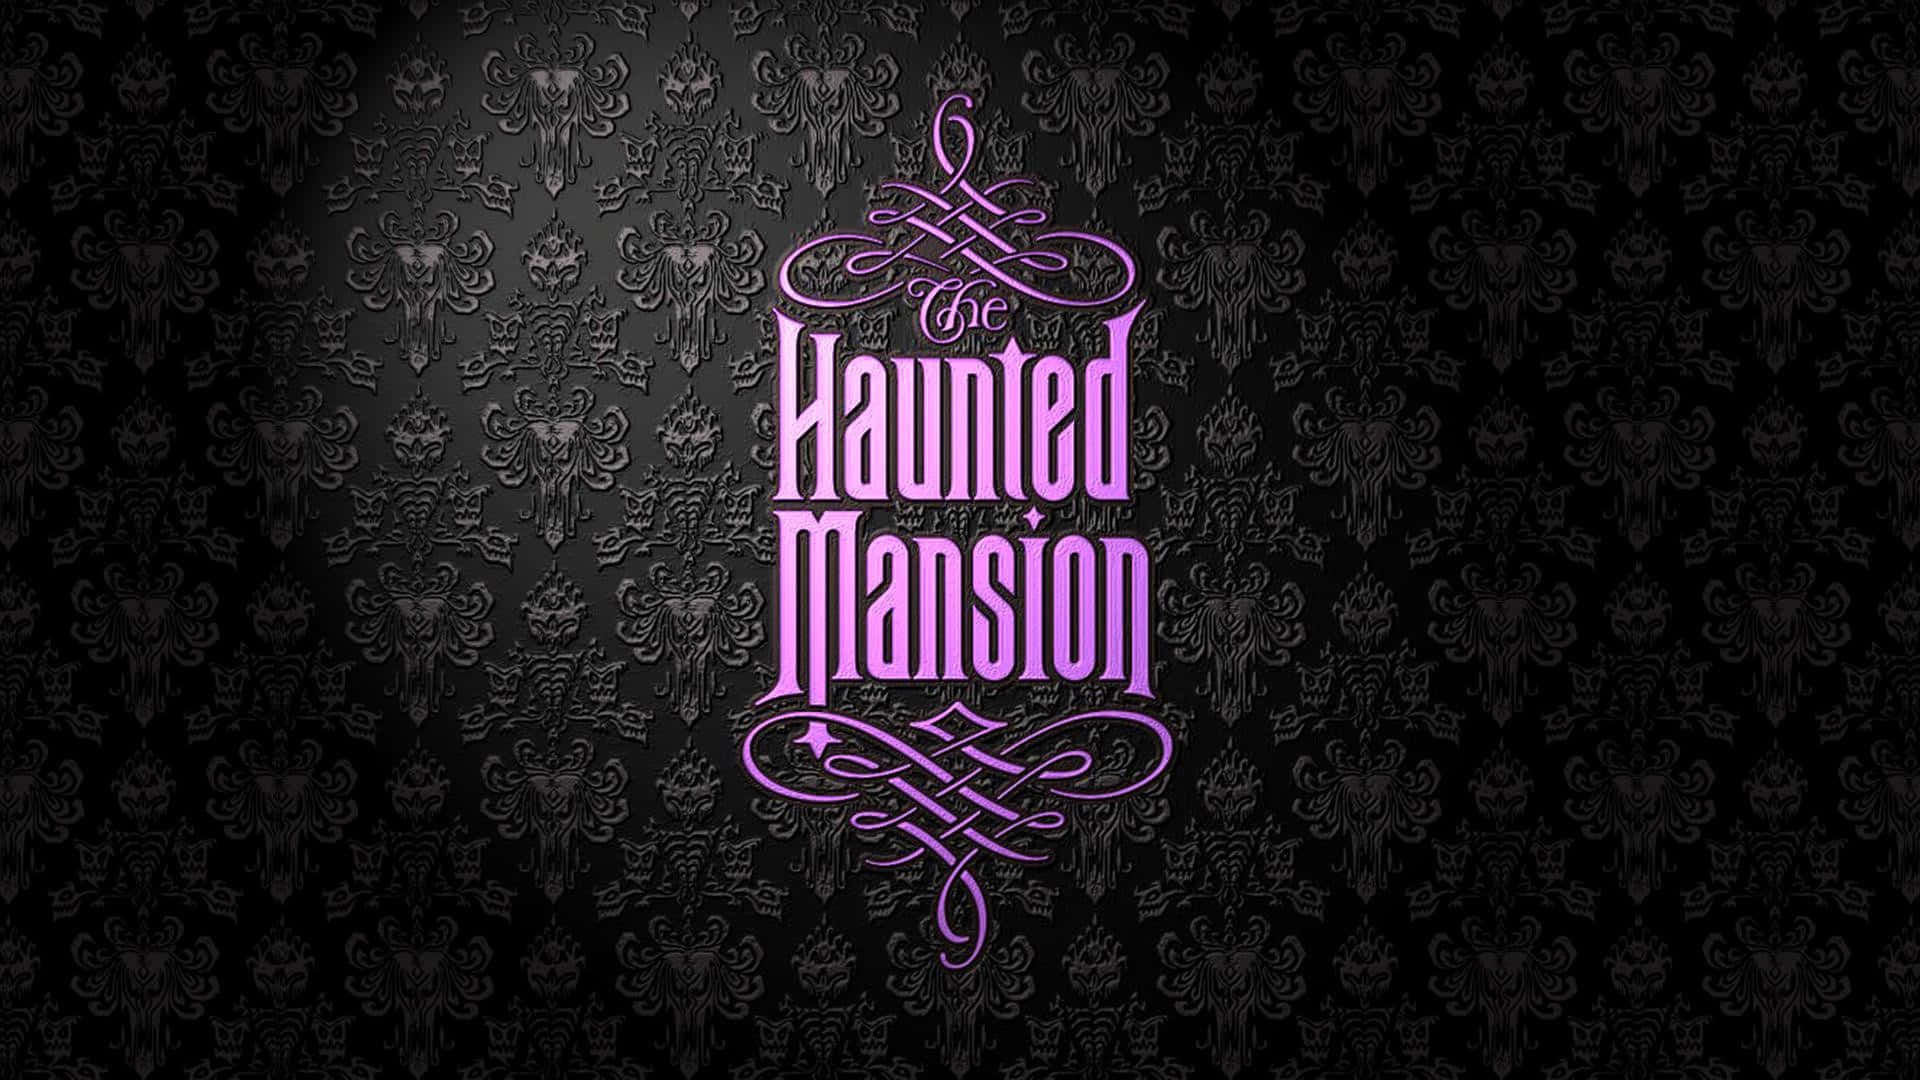 Take a haunted stroll through a mysterious mansion